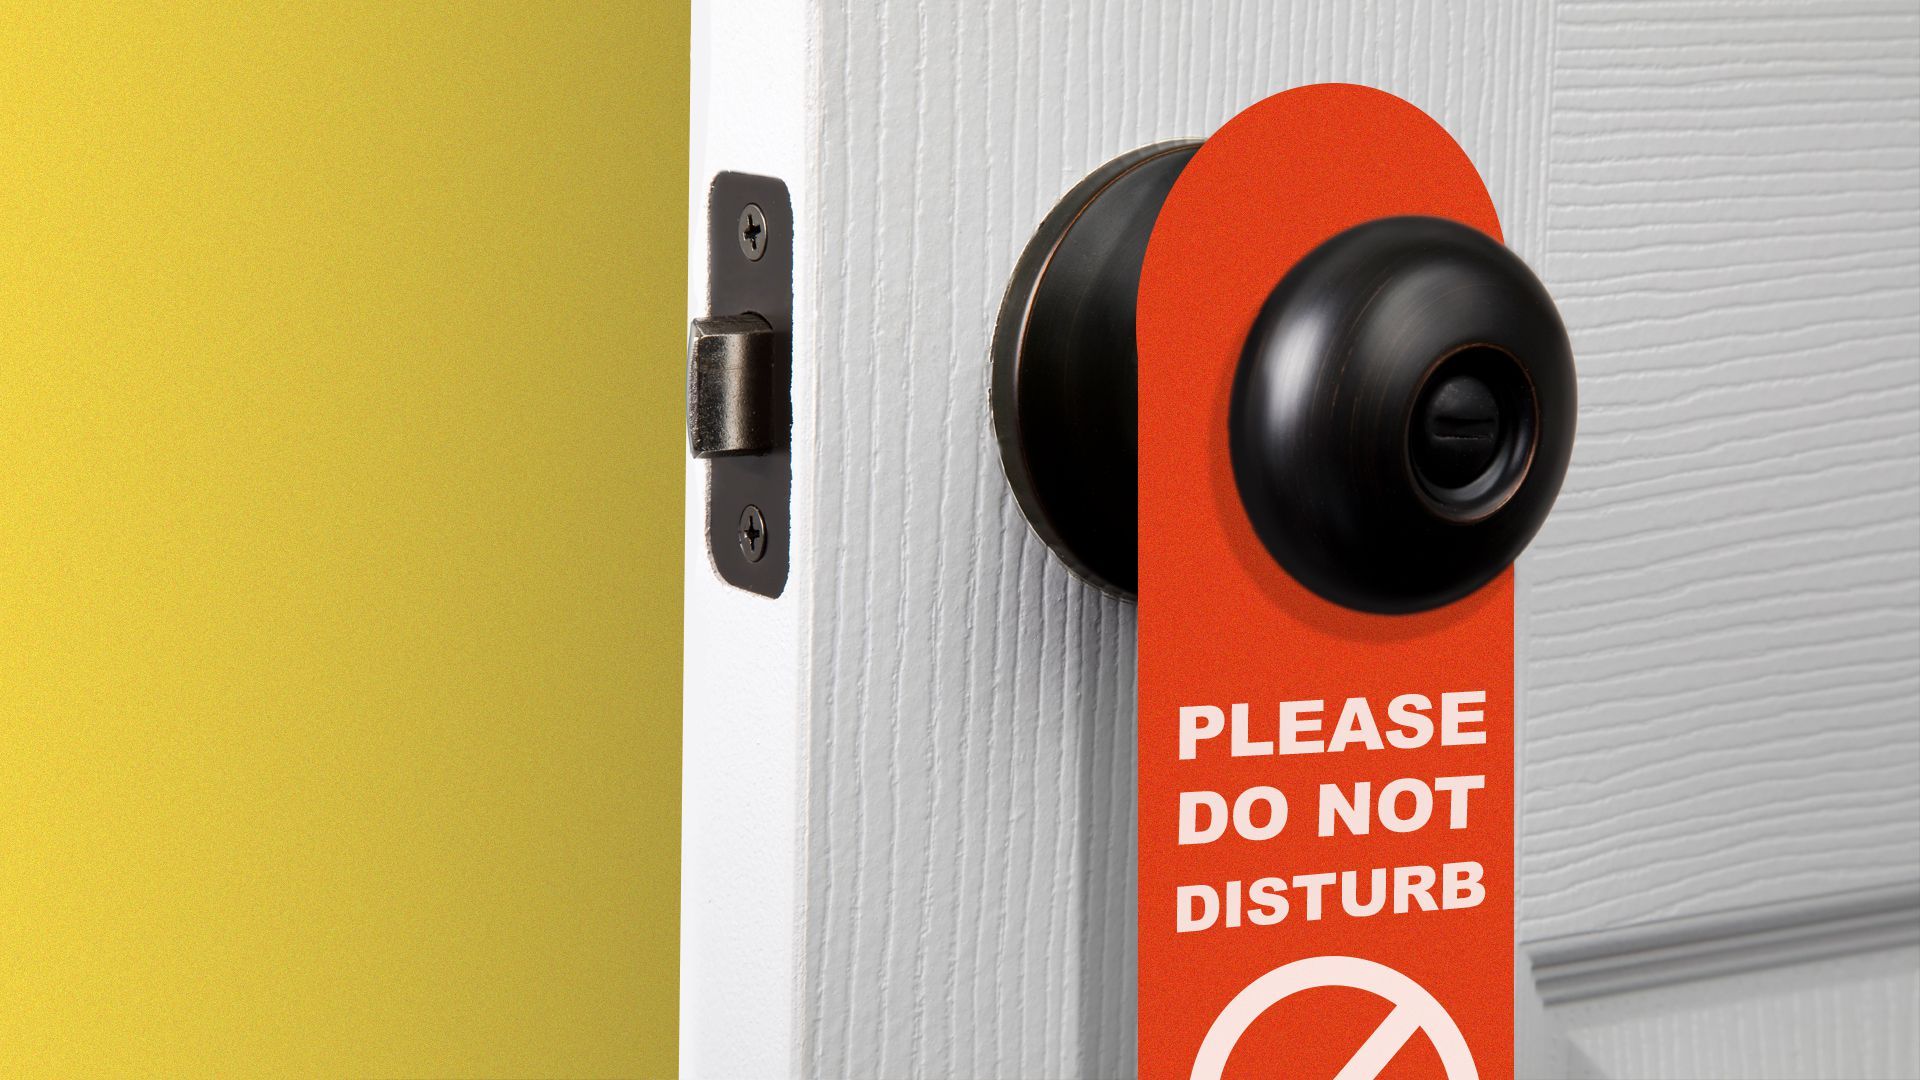 Illustration of a “Do Not Disturb” sign hanging on an open door.